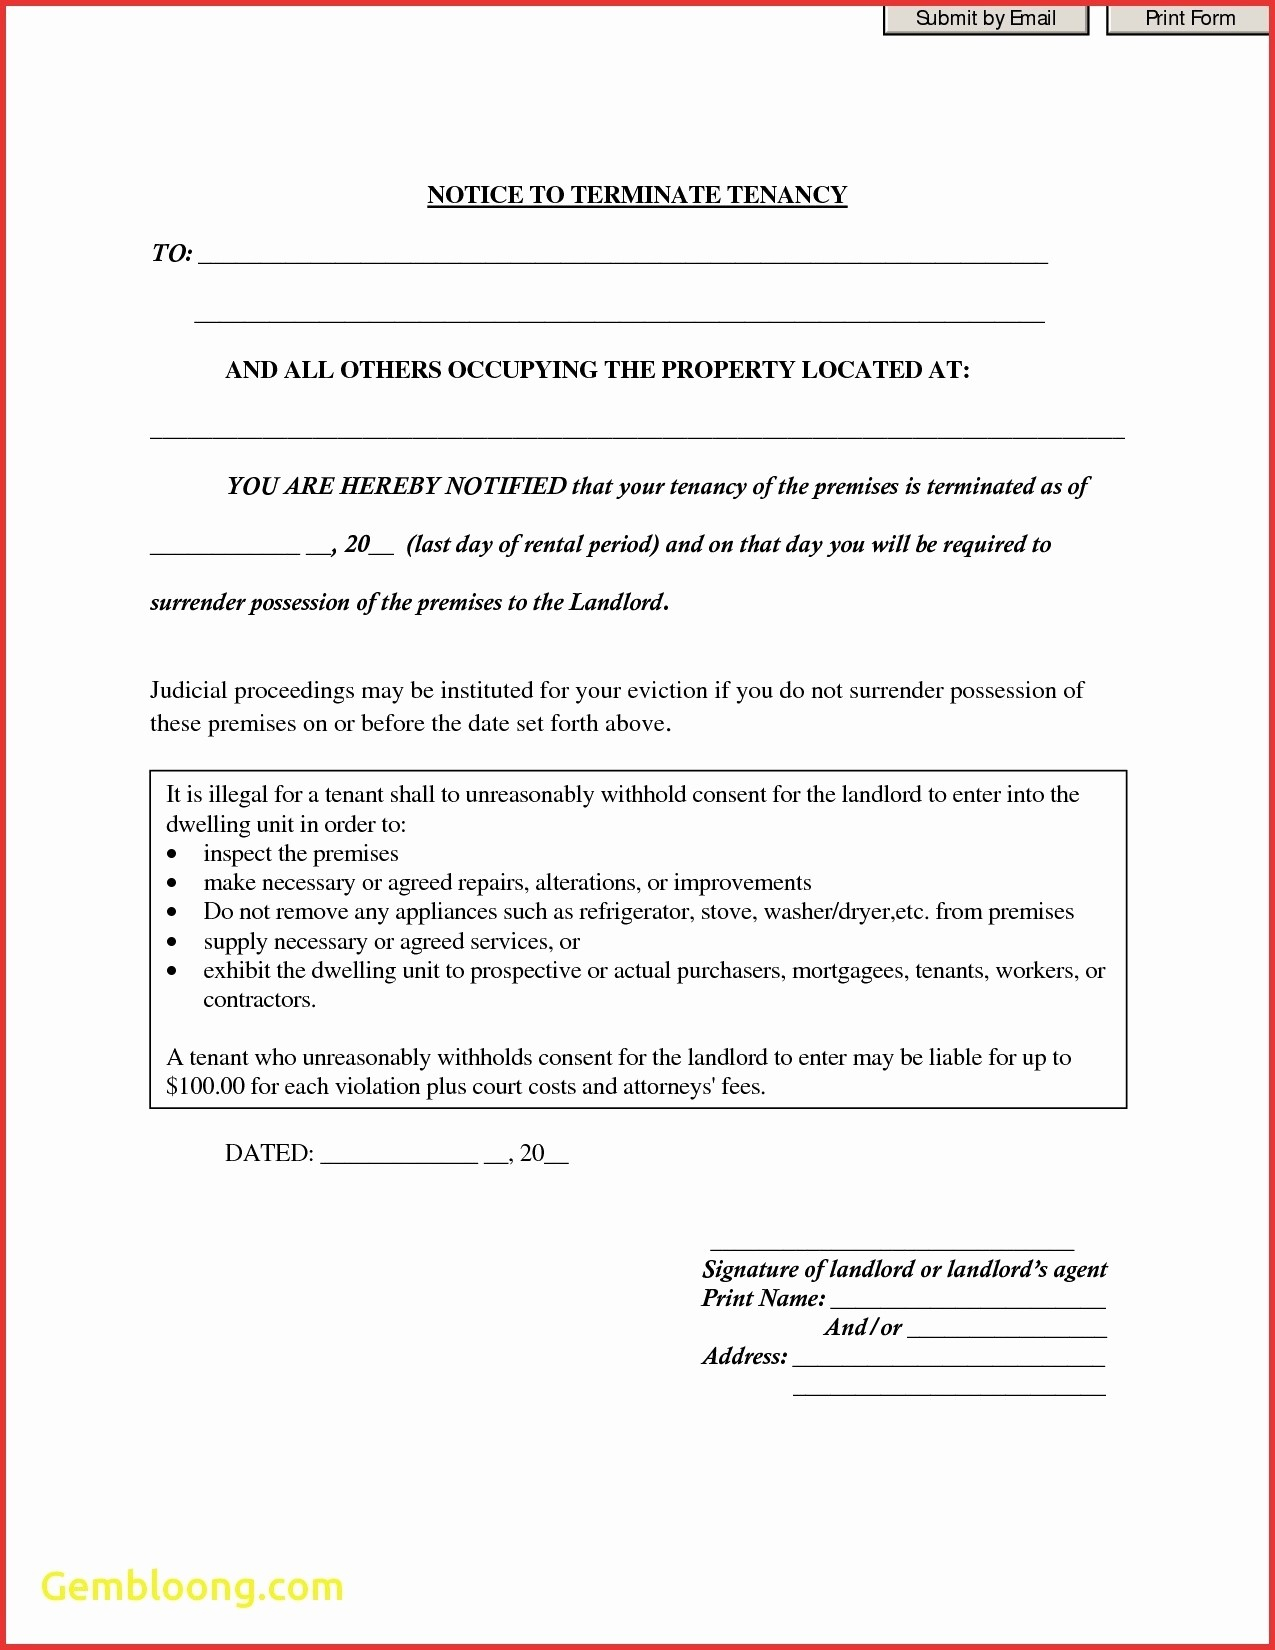 Free Tenant Eviction Letter Template - Fresh Eviction Notices